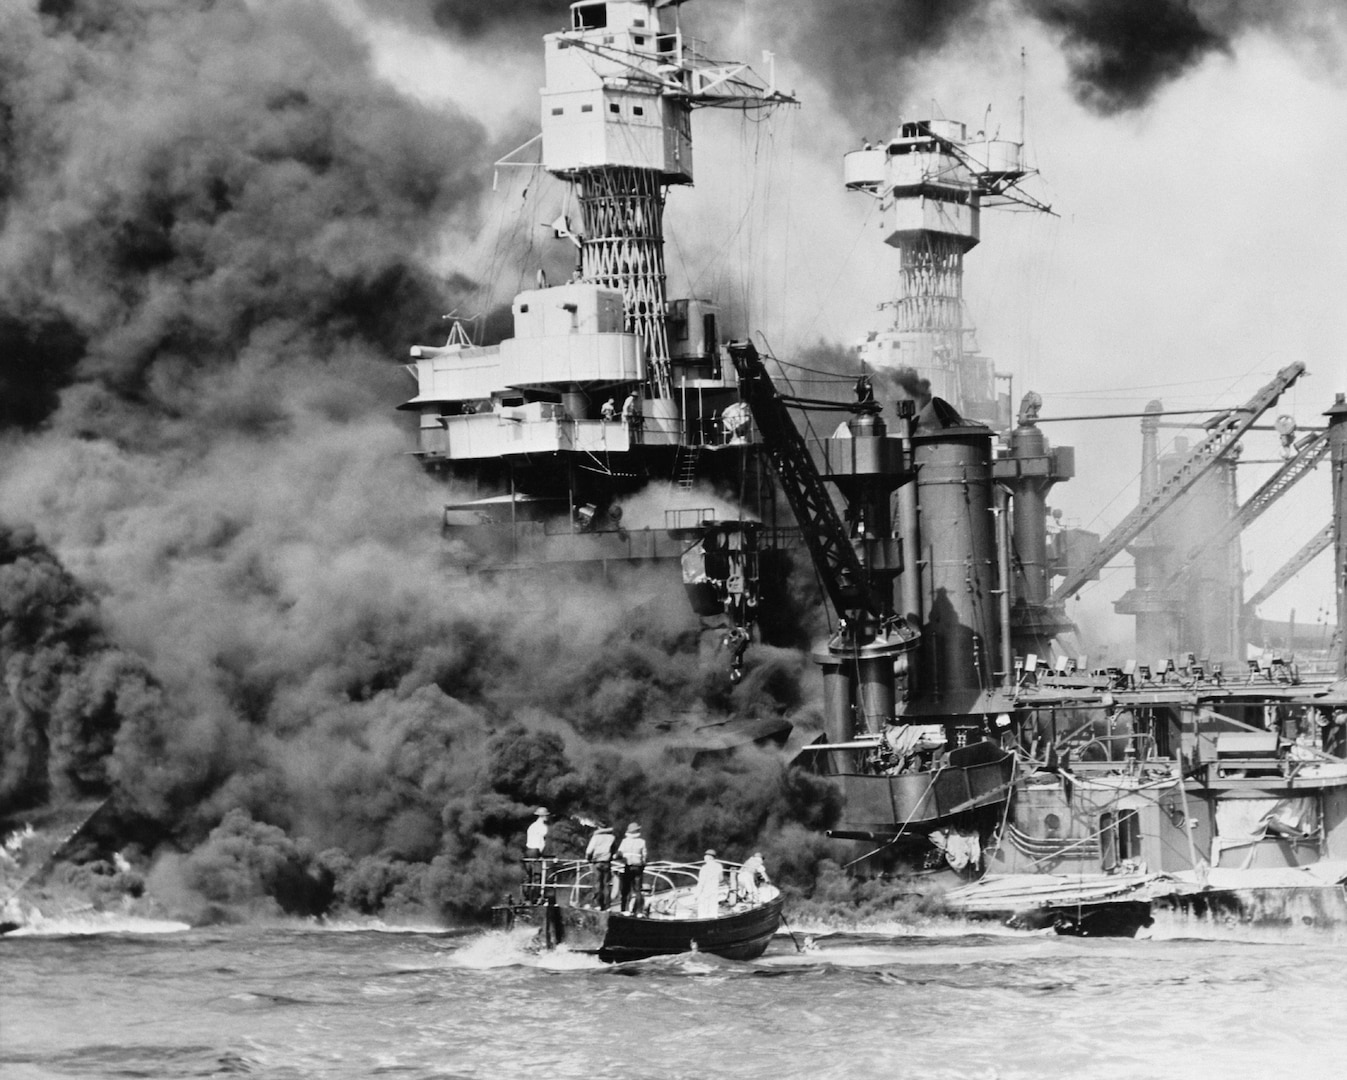 Nation Observes 80th Anniversary of Attack on Pearl Harbor